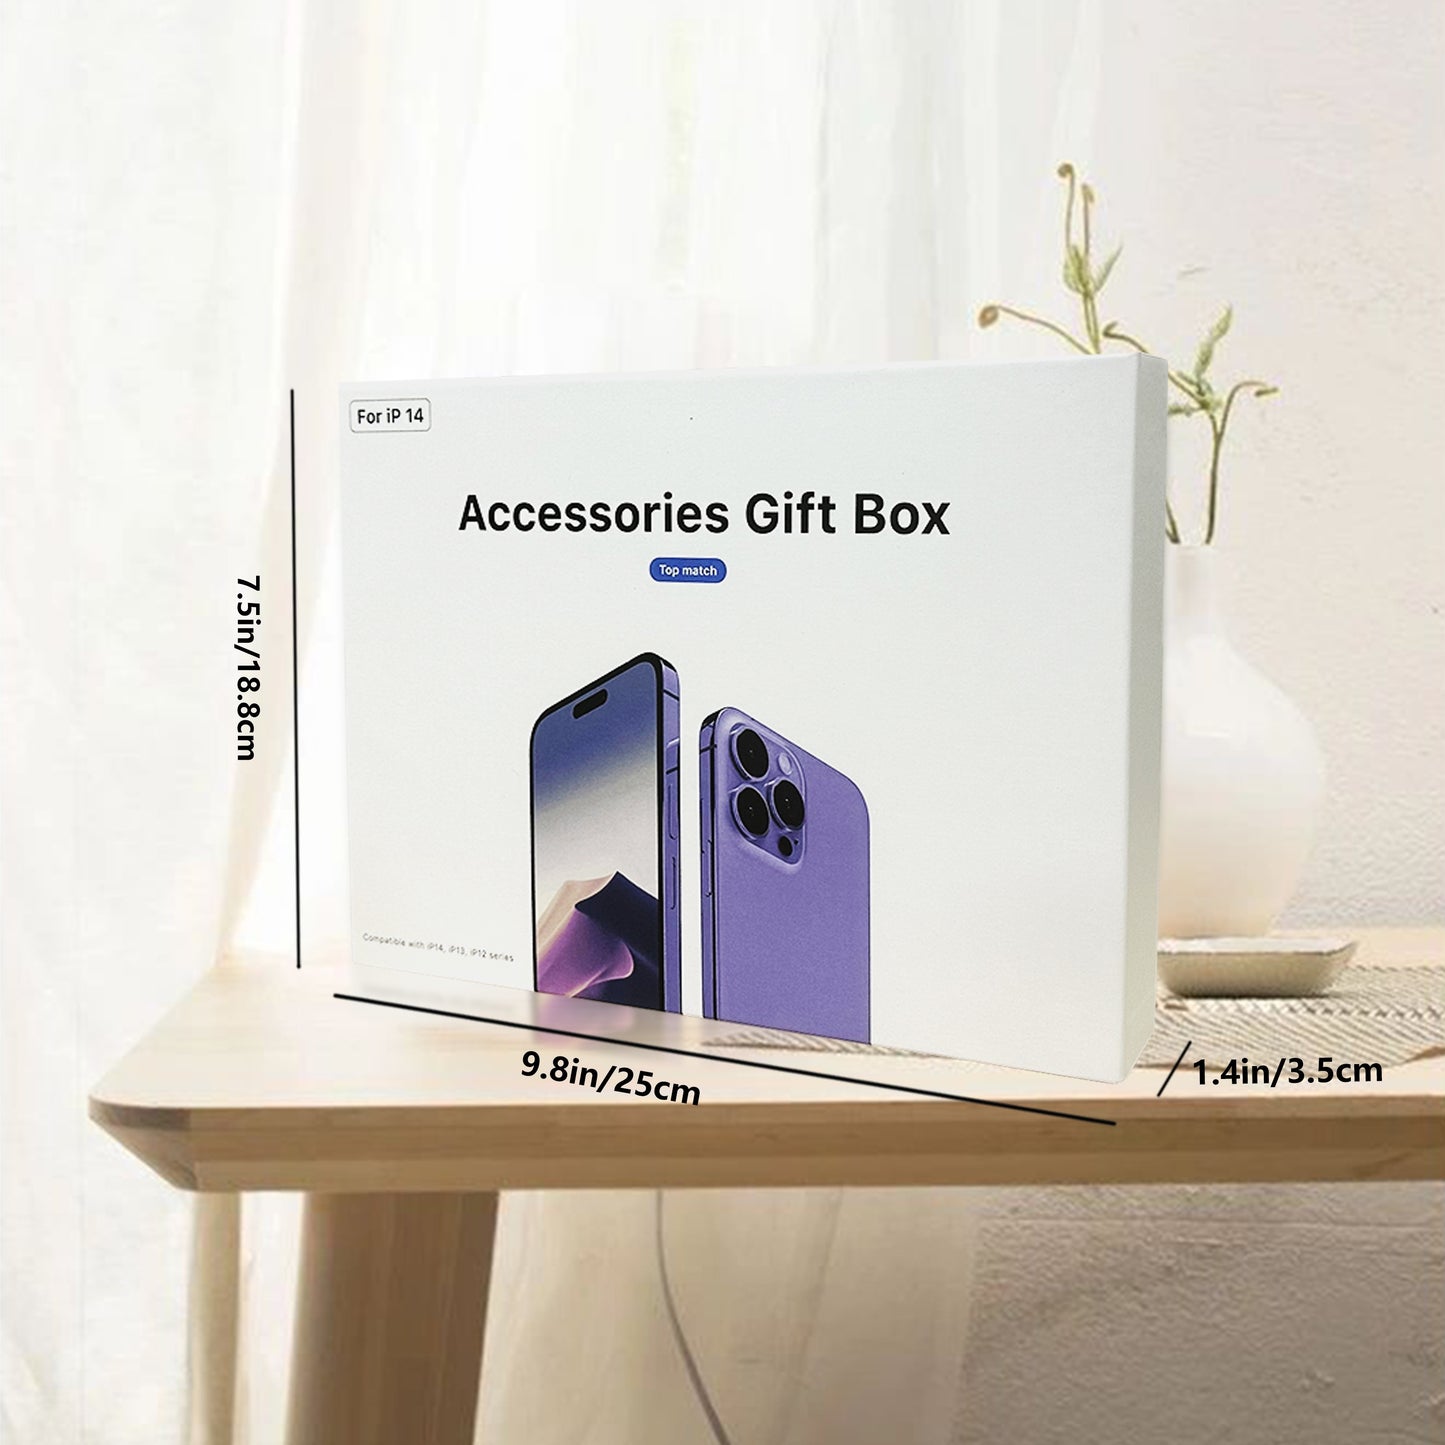 Mobile Phone Accessories Gift Box Four-piece Set (Suitable For IPhones) With PD20w Fast Charging Cable, Magnetic Mobile Phone Case, Wireless Earphones, Magnetic Charger, For IPhone 14/13/12/11 Series